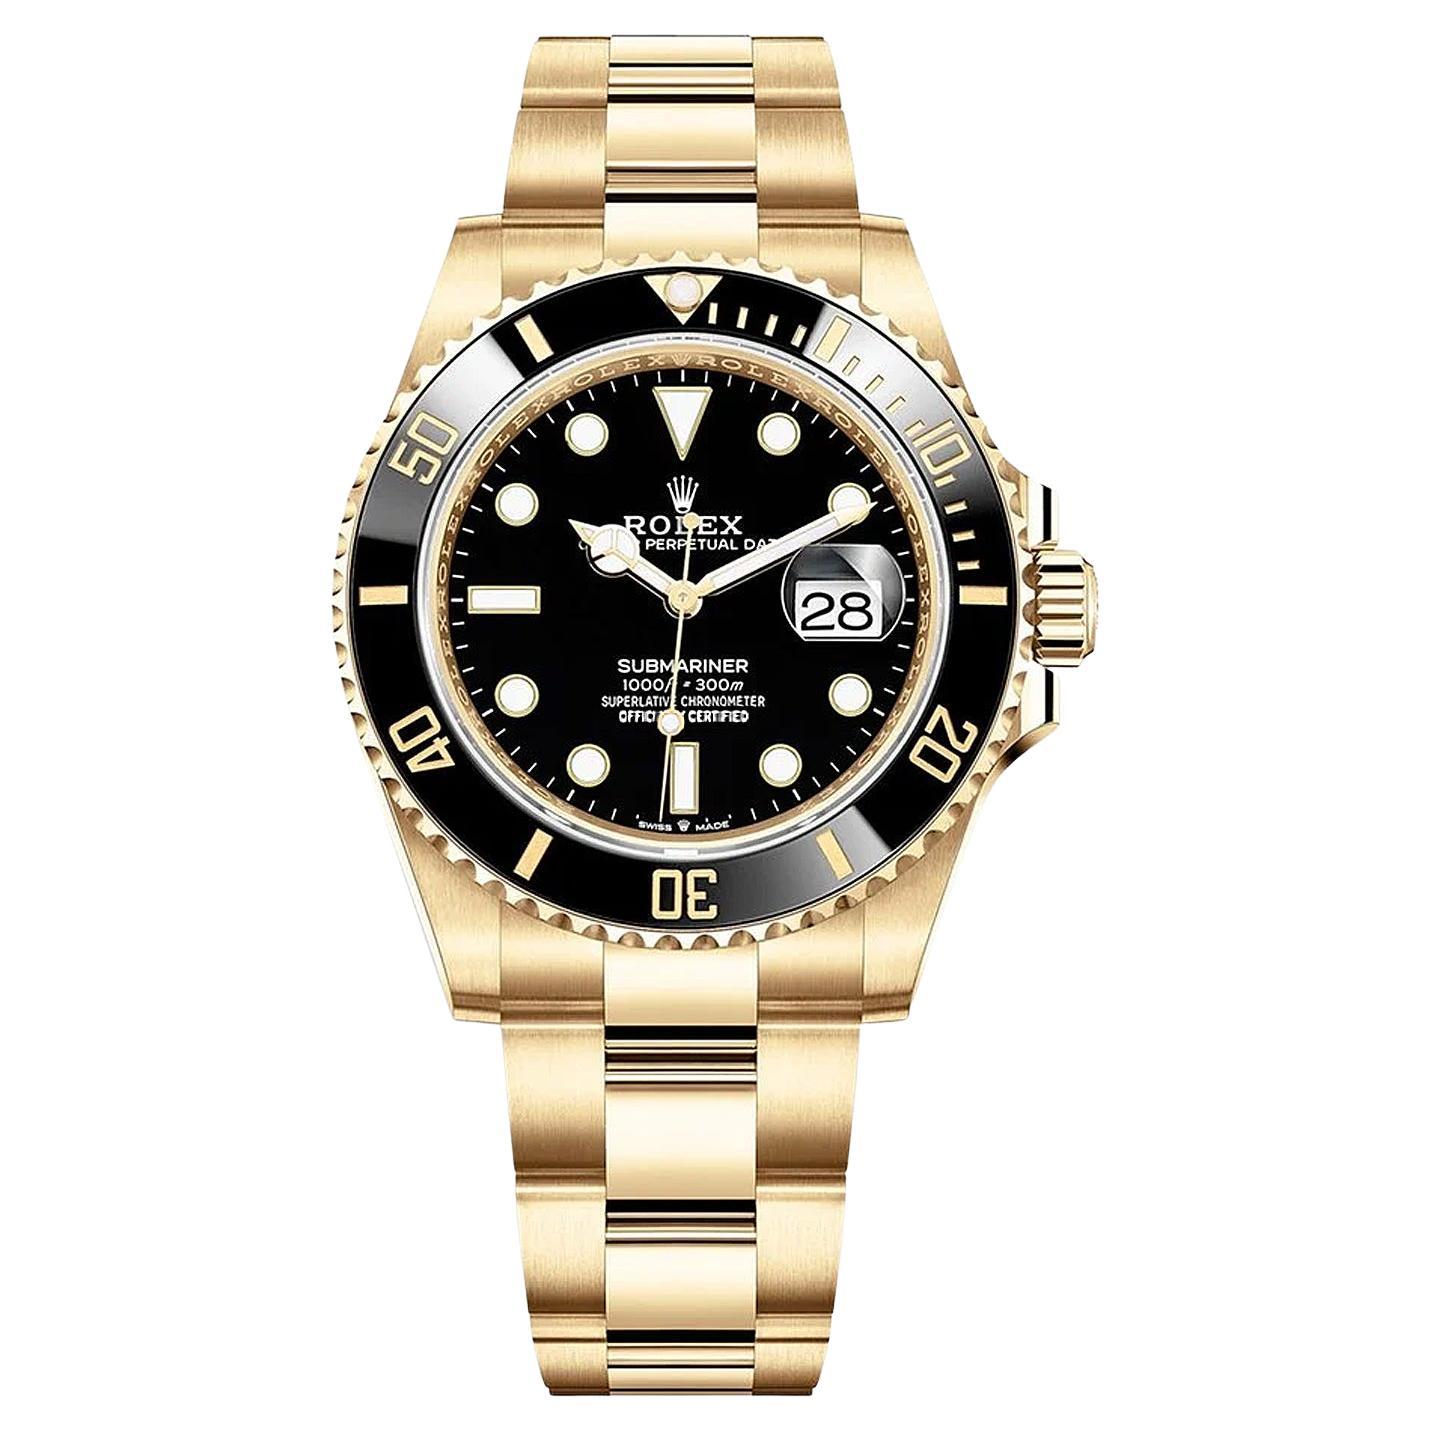 Rolex Submariner Date Yellow Gold Black Dial Men's Oyster Watch 126618LN